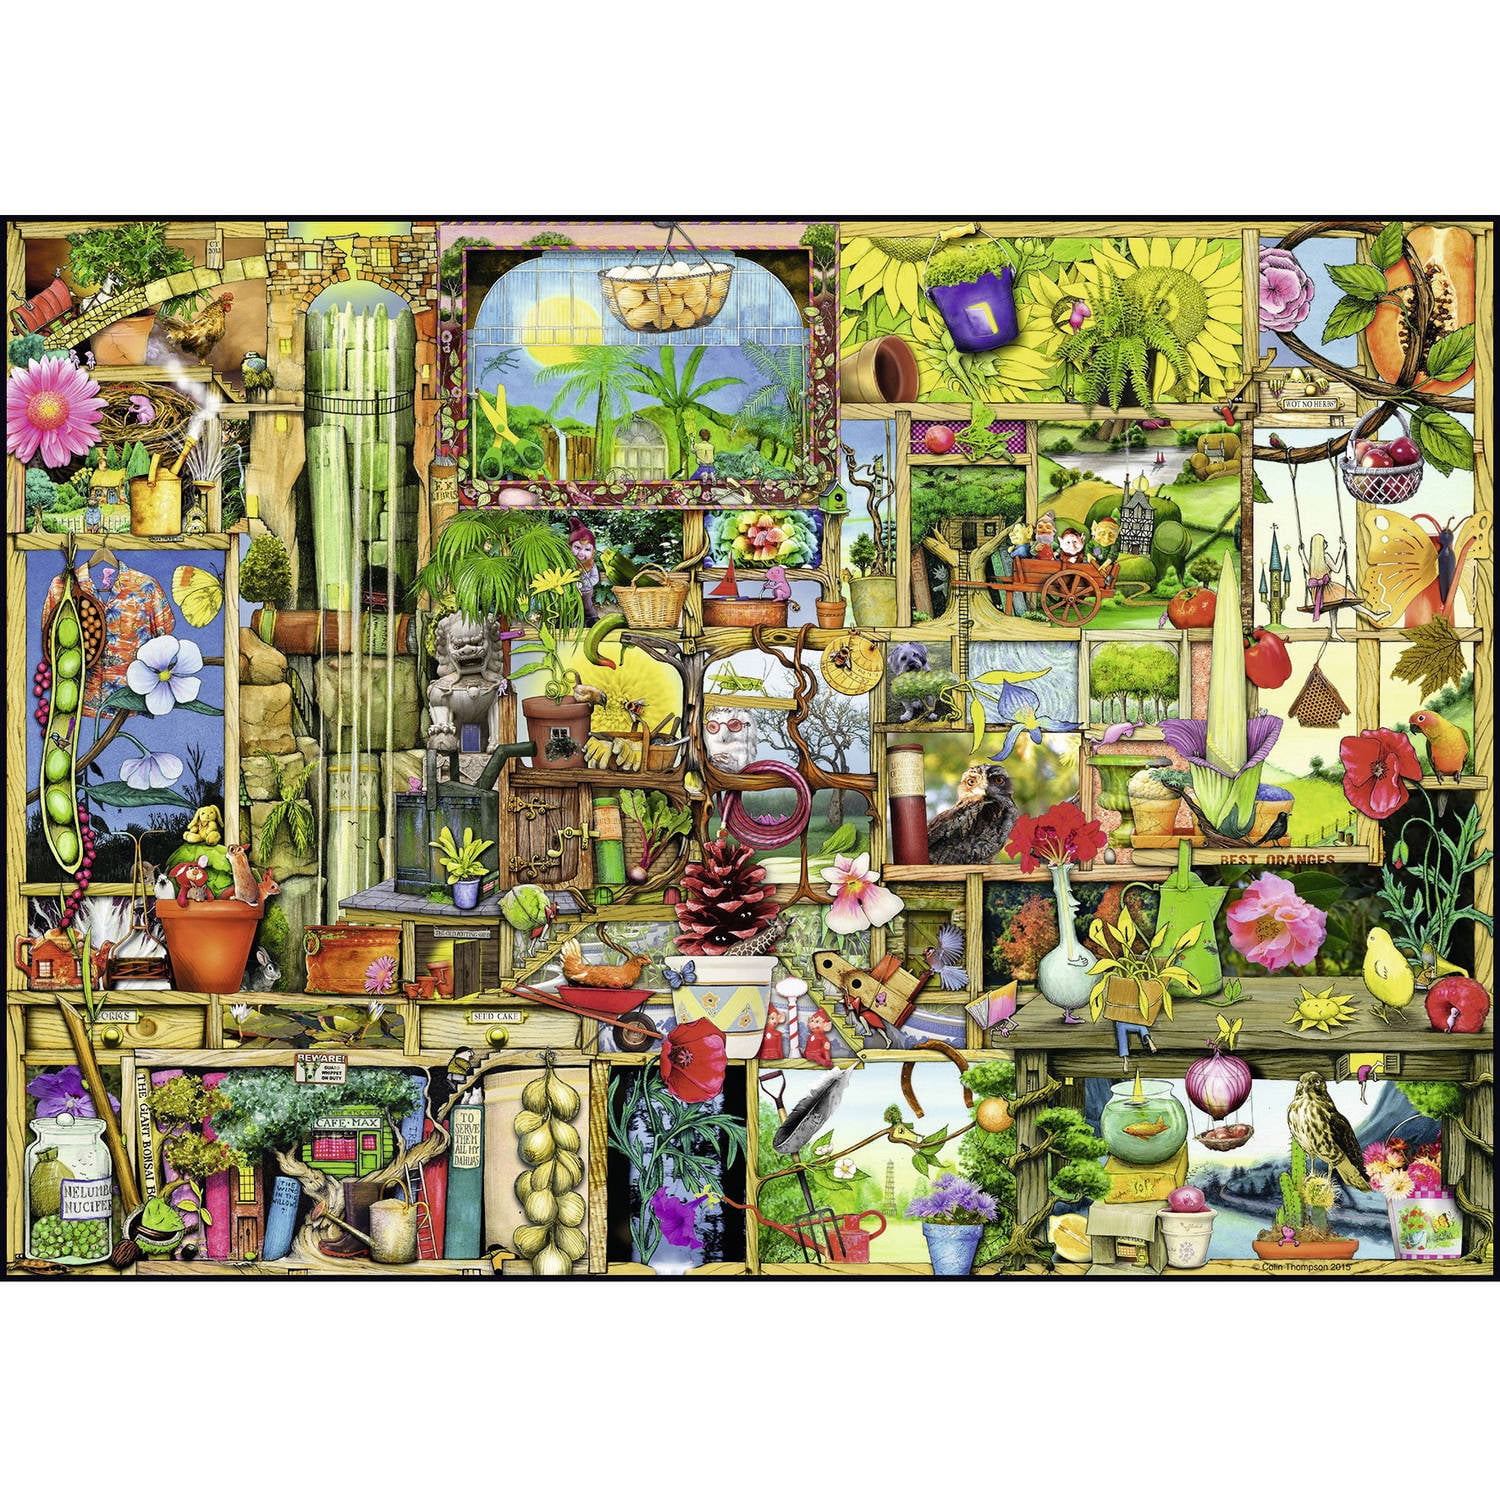 portes Doors of the world 1000 pièces OVP rare Ravensburger puzzle 